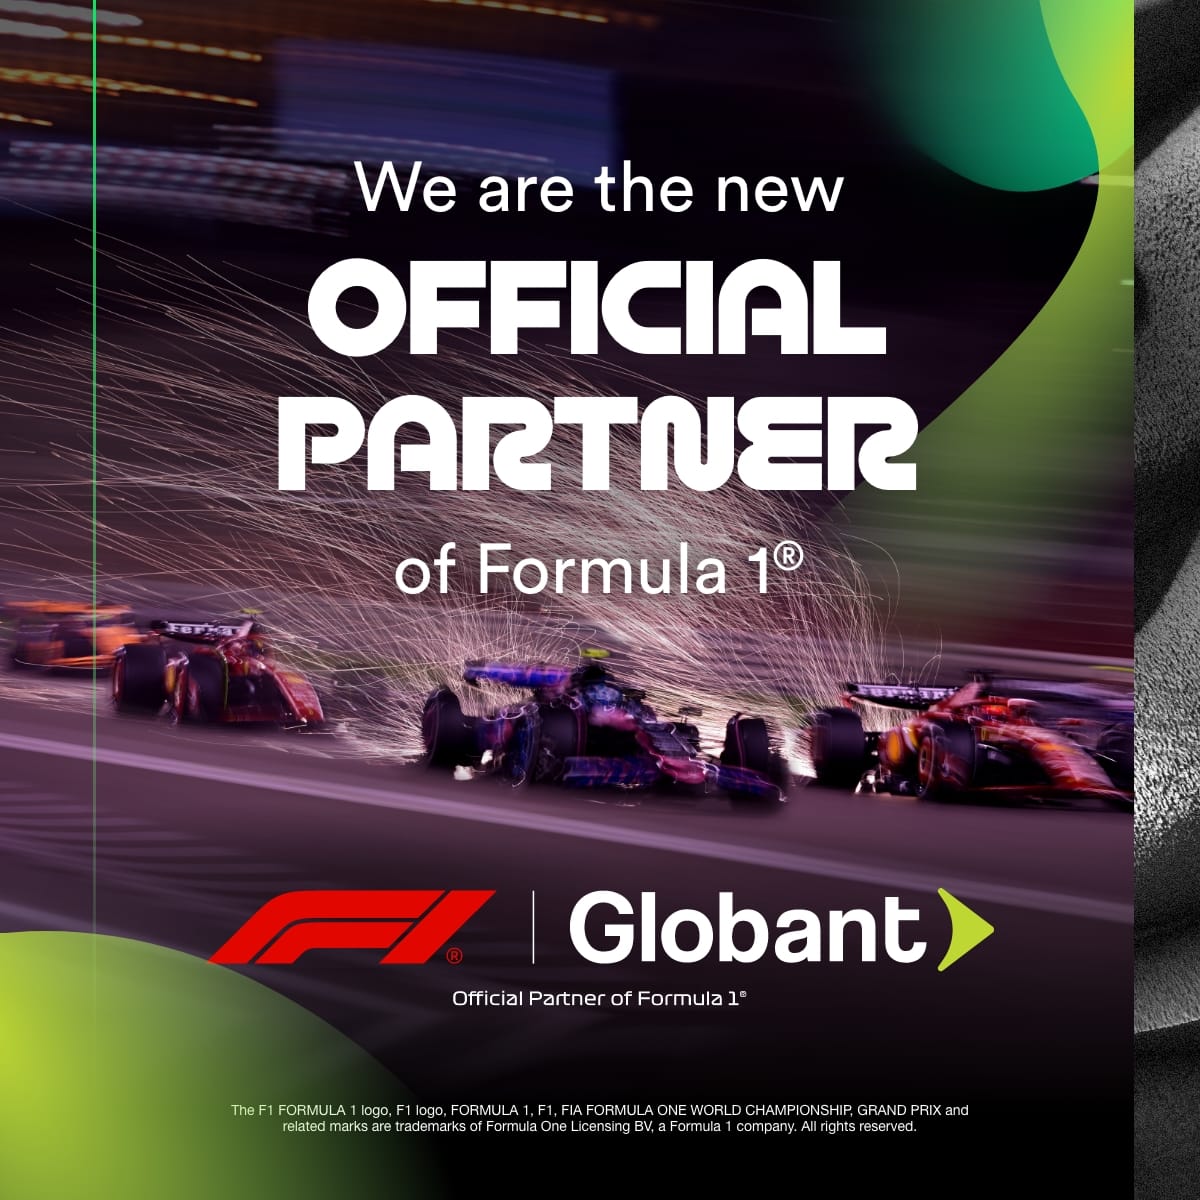 Great news today! @F1 has chosen @Globant as their digital acceleration partner to drive better and faster experiences for teams, race officials and fans. Very excited to work with one of the most technologically advanced sports in the world. We'll be collaborating with them on